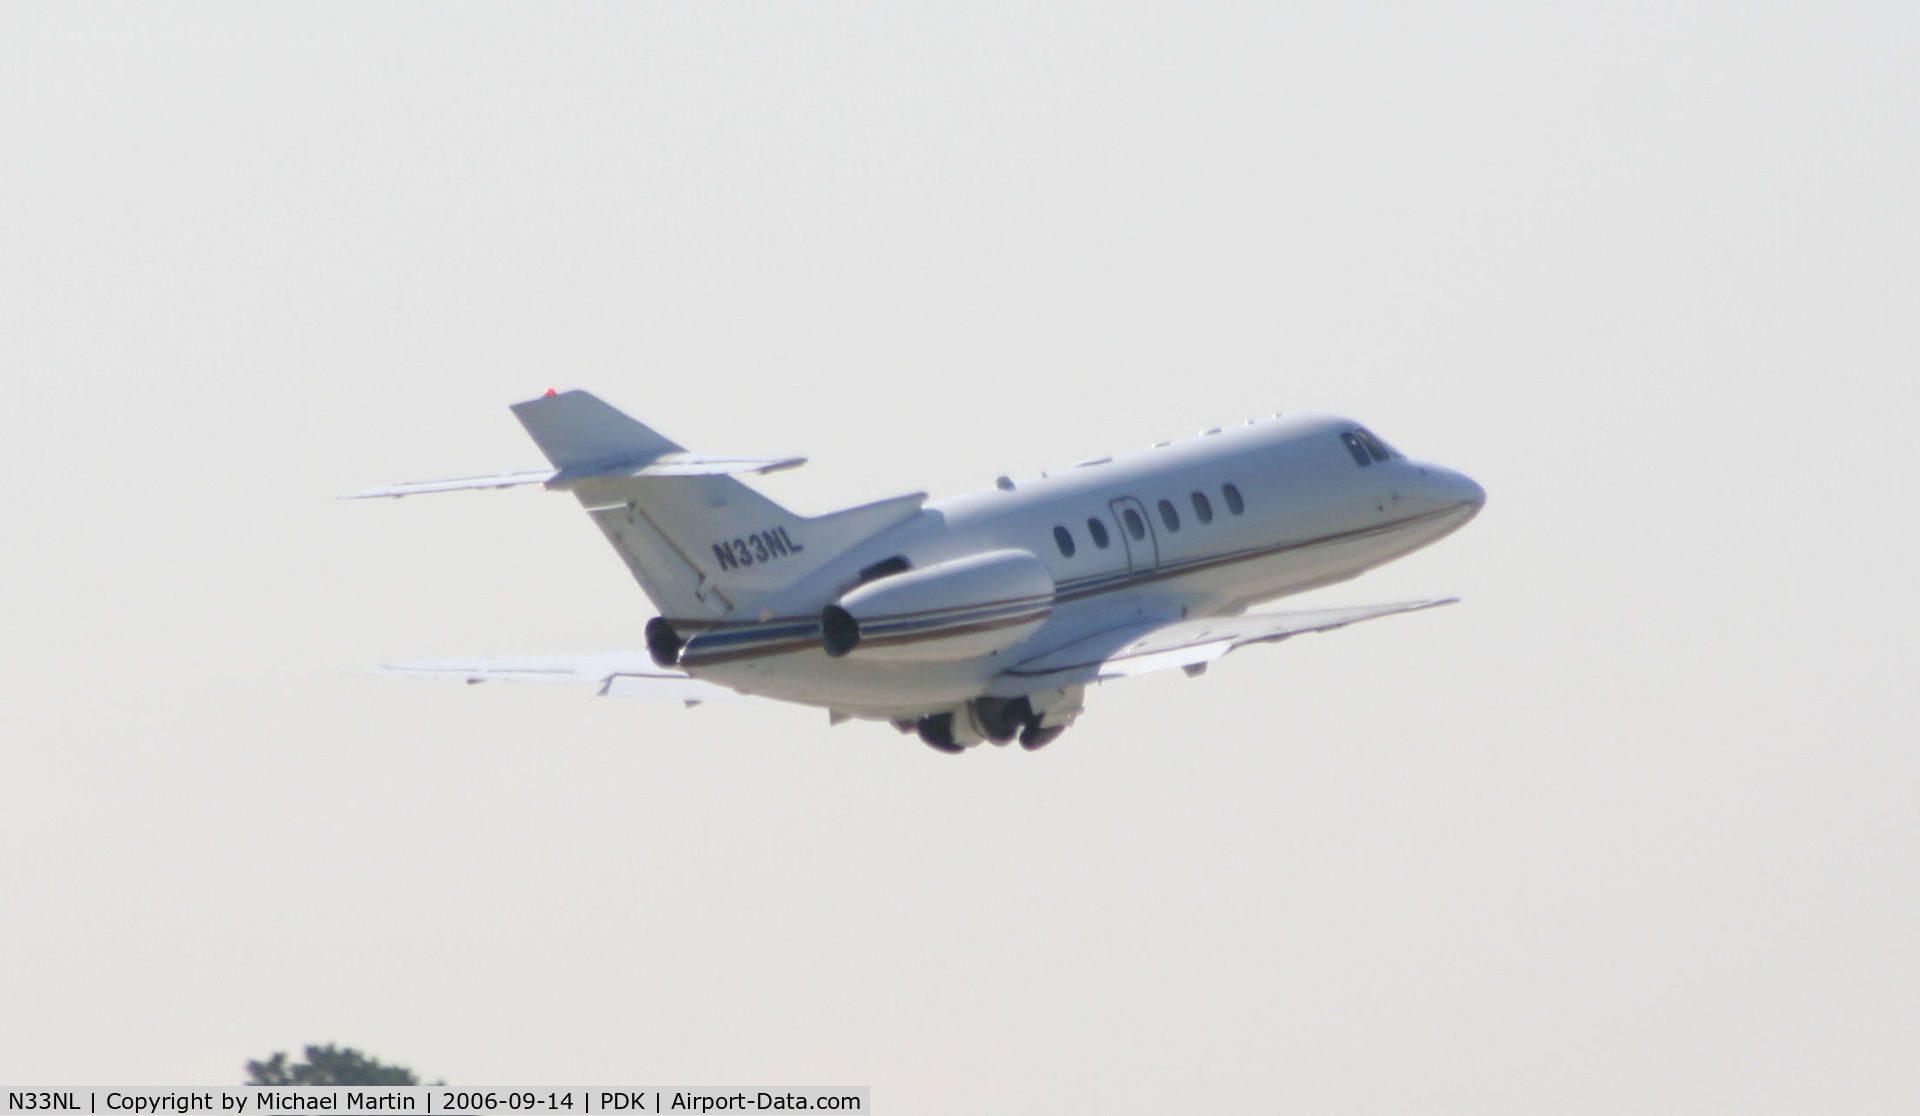 N33NL, 2003 Raytheon Hawker 800XP C/N 258643, Gear up after take off from 20L